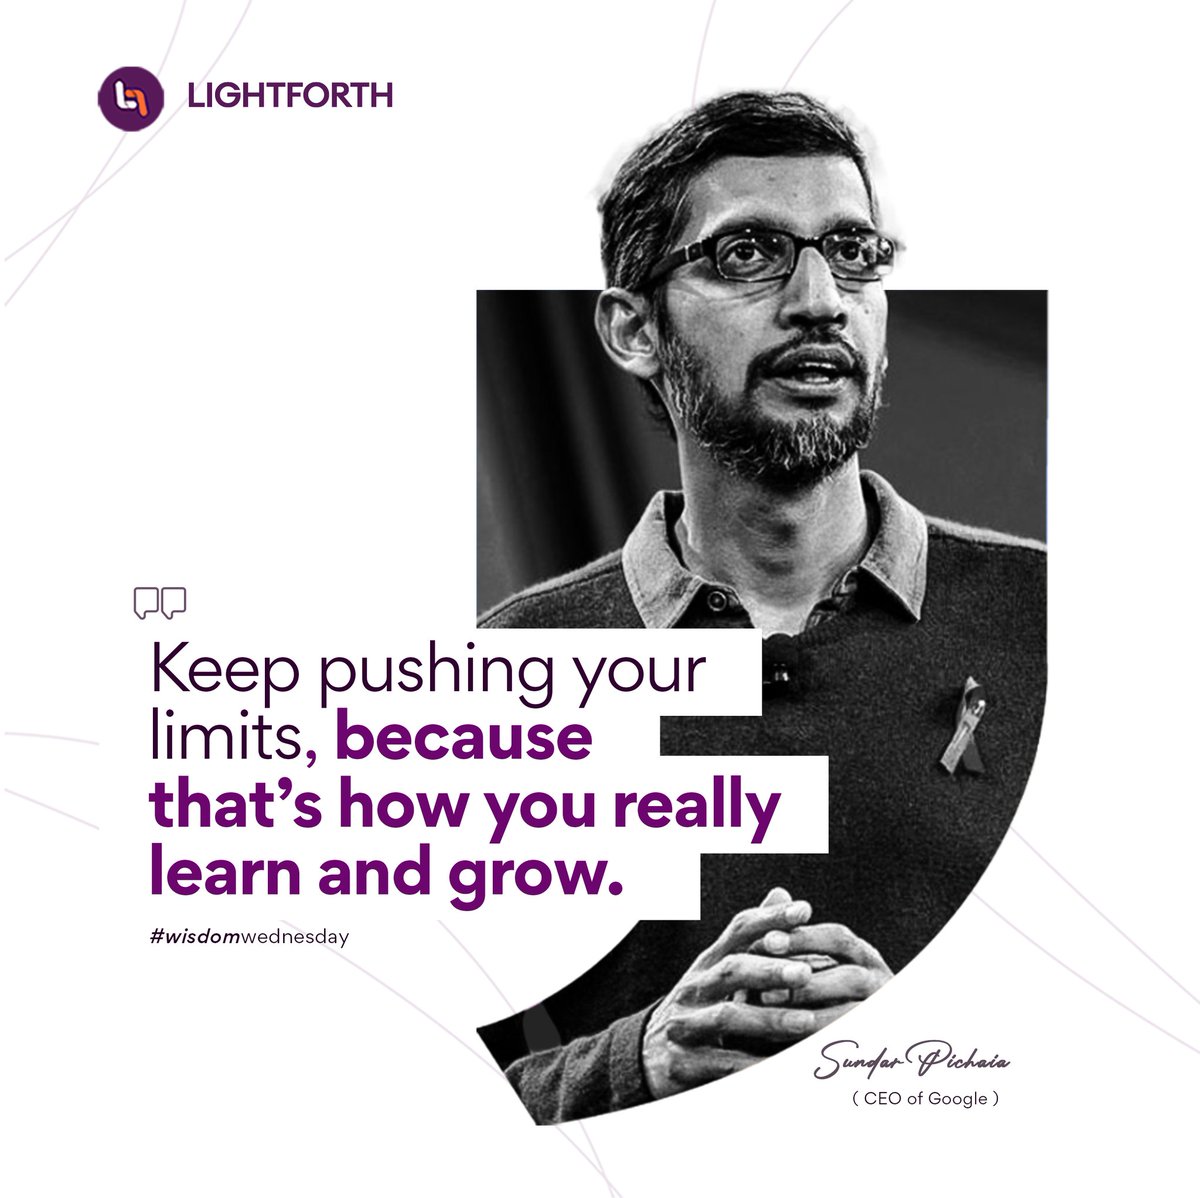 This week on WISDOM WEDNESDAY 🌟 ;

Sundar Pichai, CEO of Google, says:  'Keep pushing your limits, because that’s how you really learn and grow.' 

Today, let's step out of our comfort zones and strive for personal growth!

#WisdomWednesday #GrowthMindset